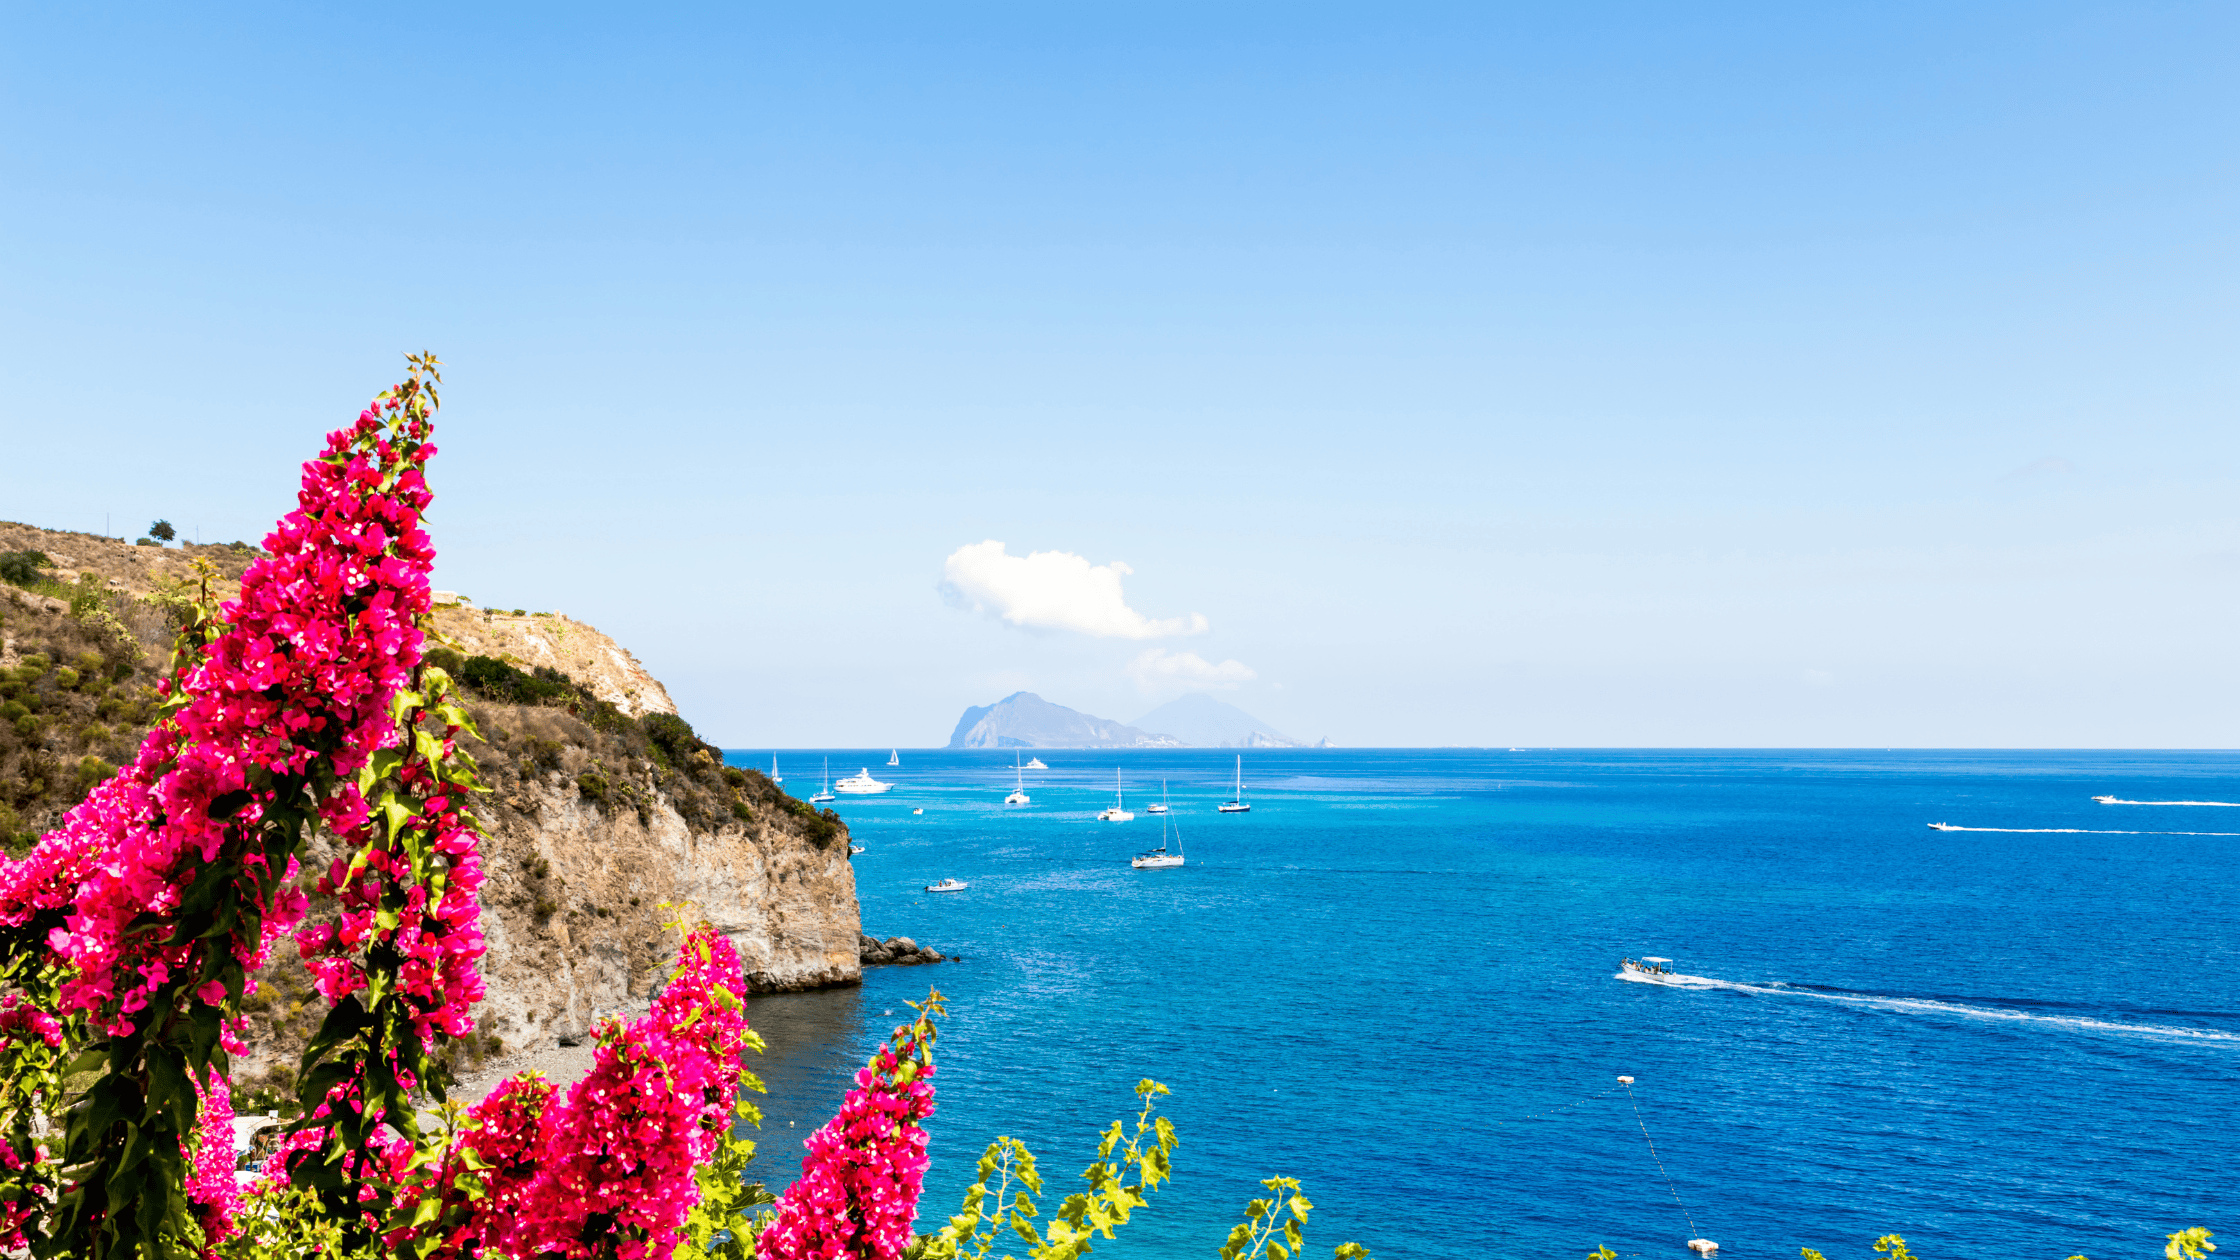 Our guide to Sicily’s Aeolian Islands